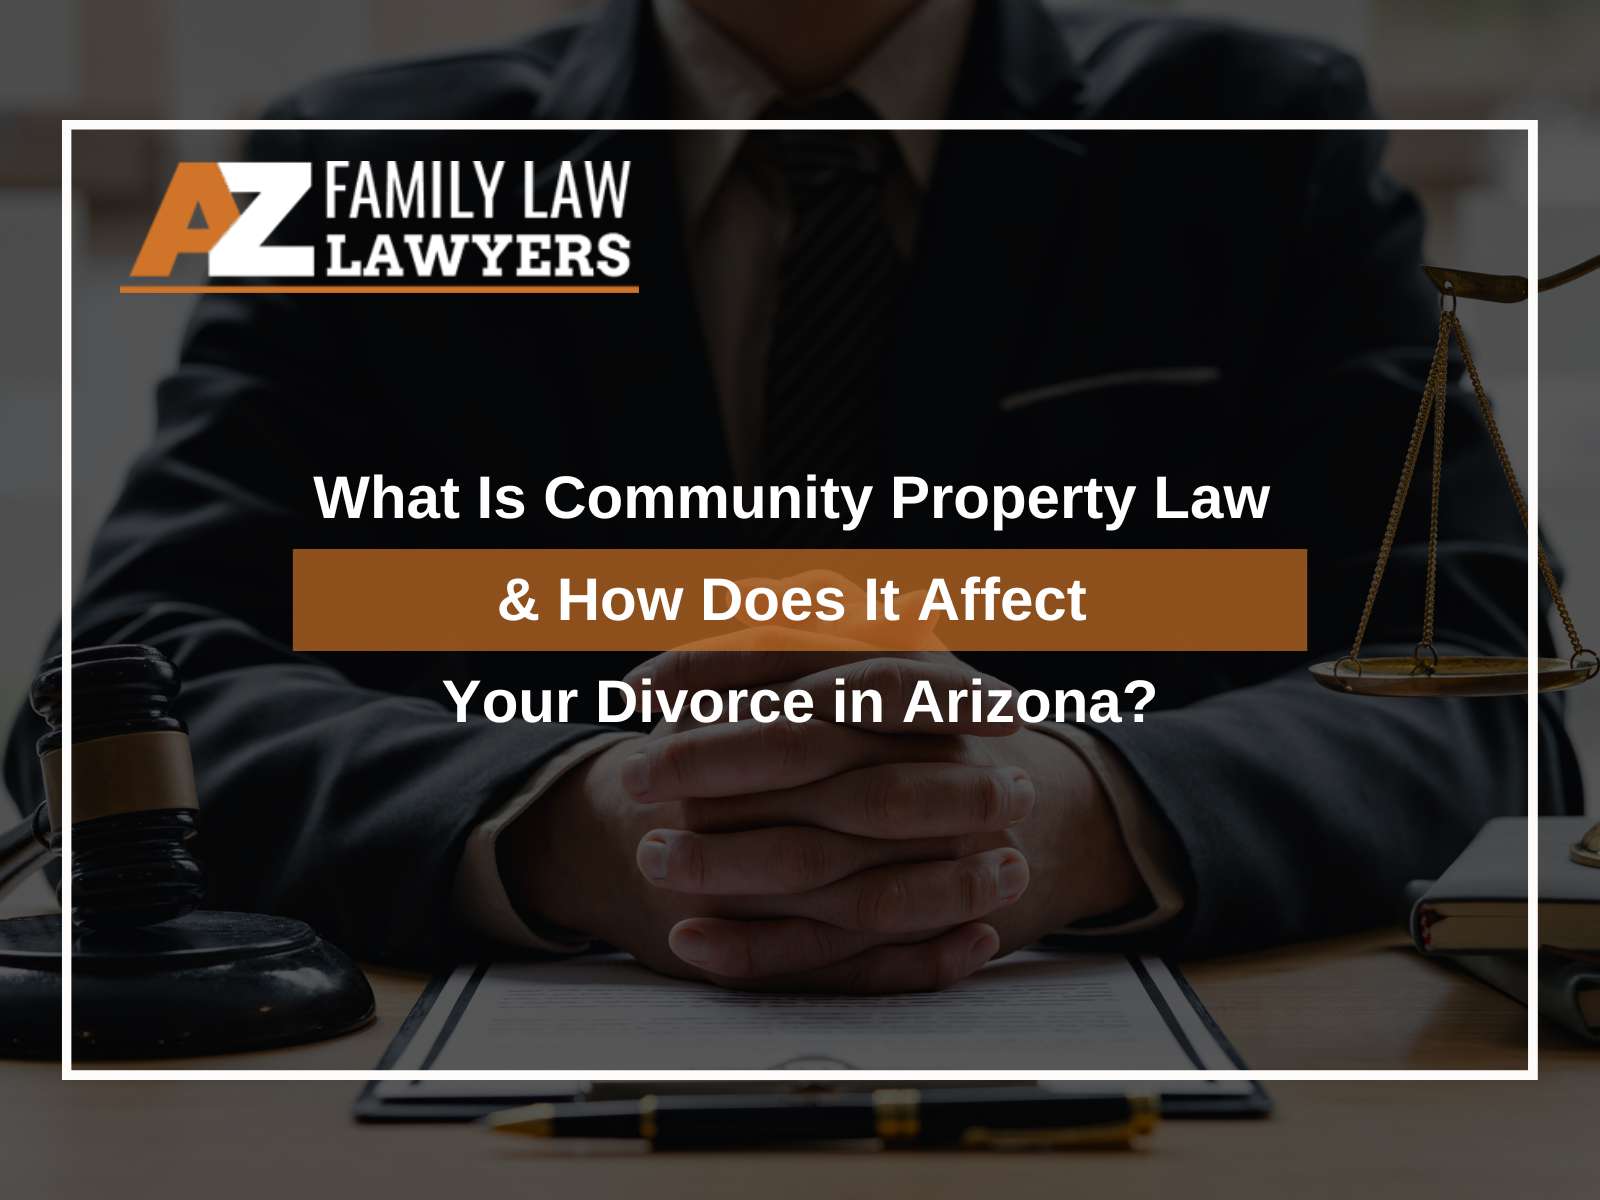 What Is Community Property Law & How Does It Affect Your Divorce in Arizona?